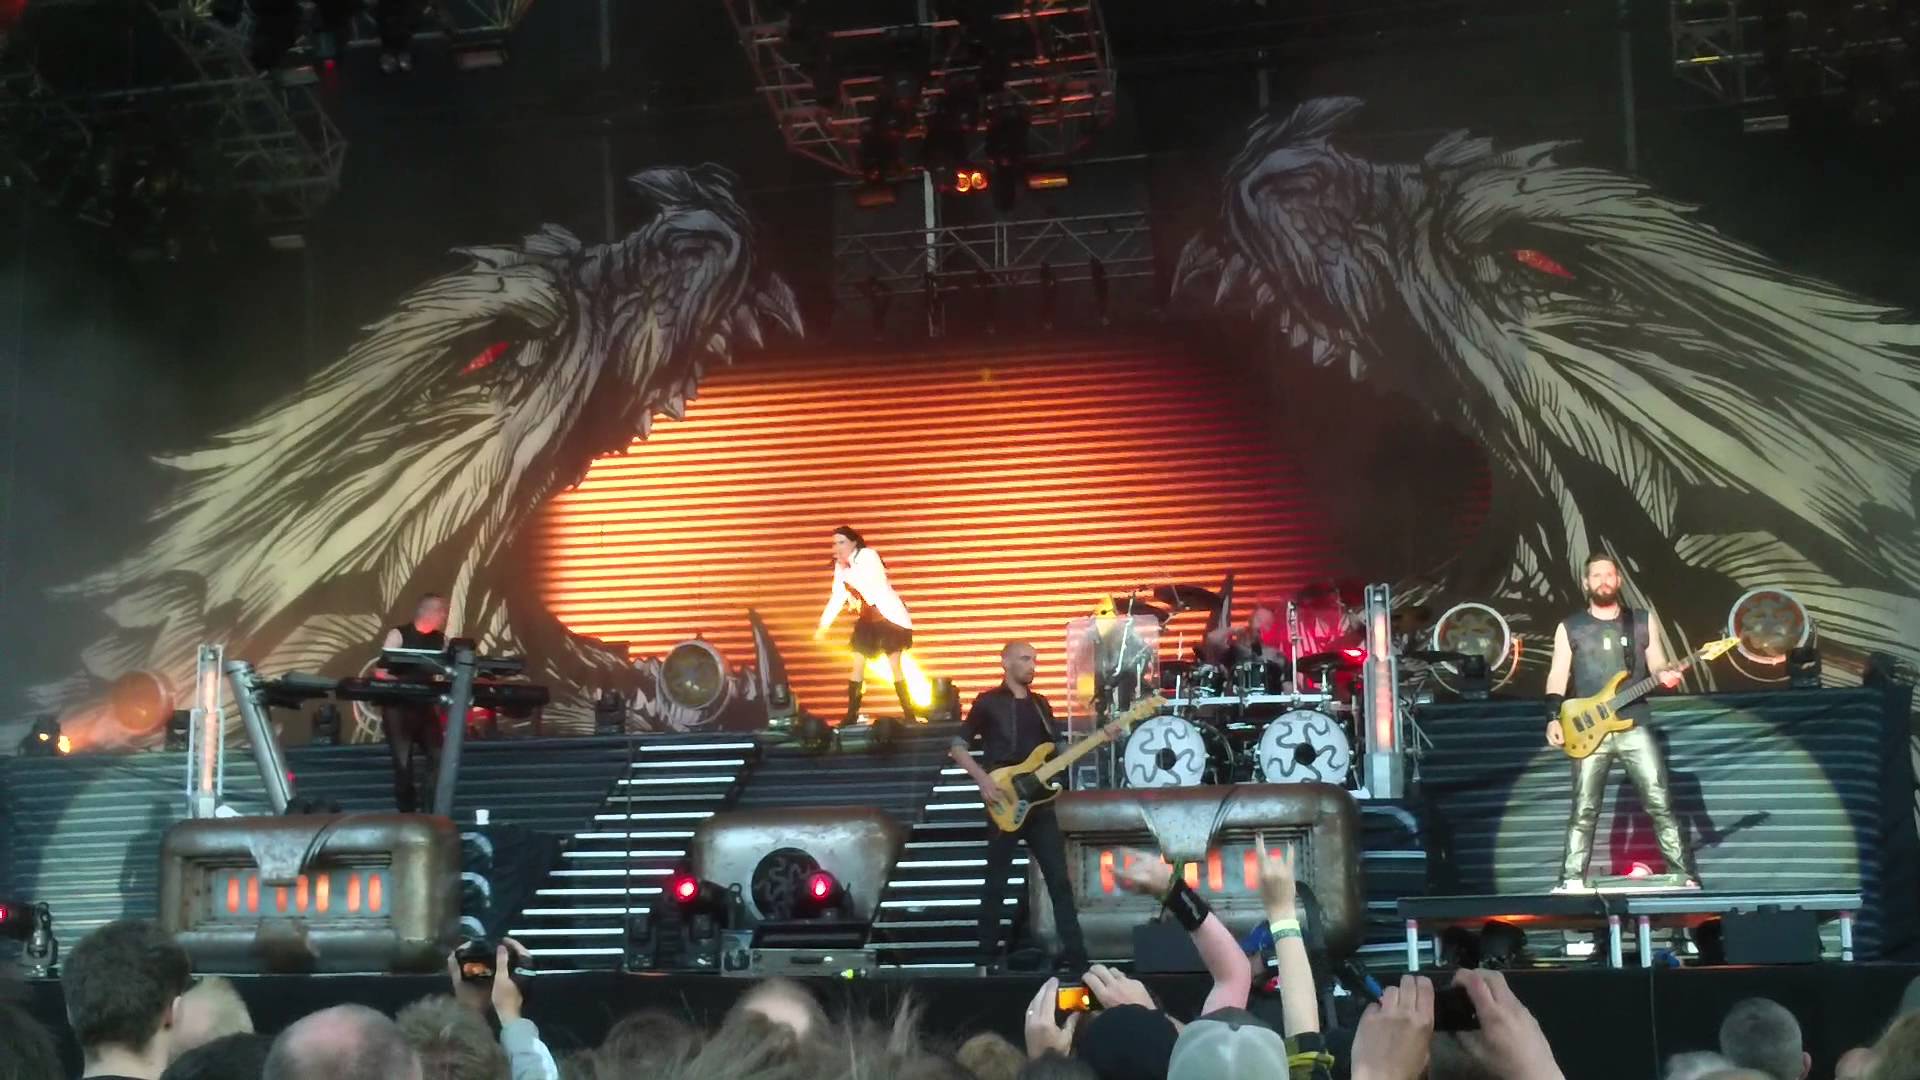 Within Temptation - "Let Us Burn" live at Copenhell 2014